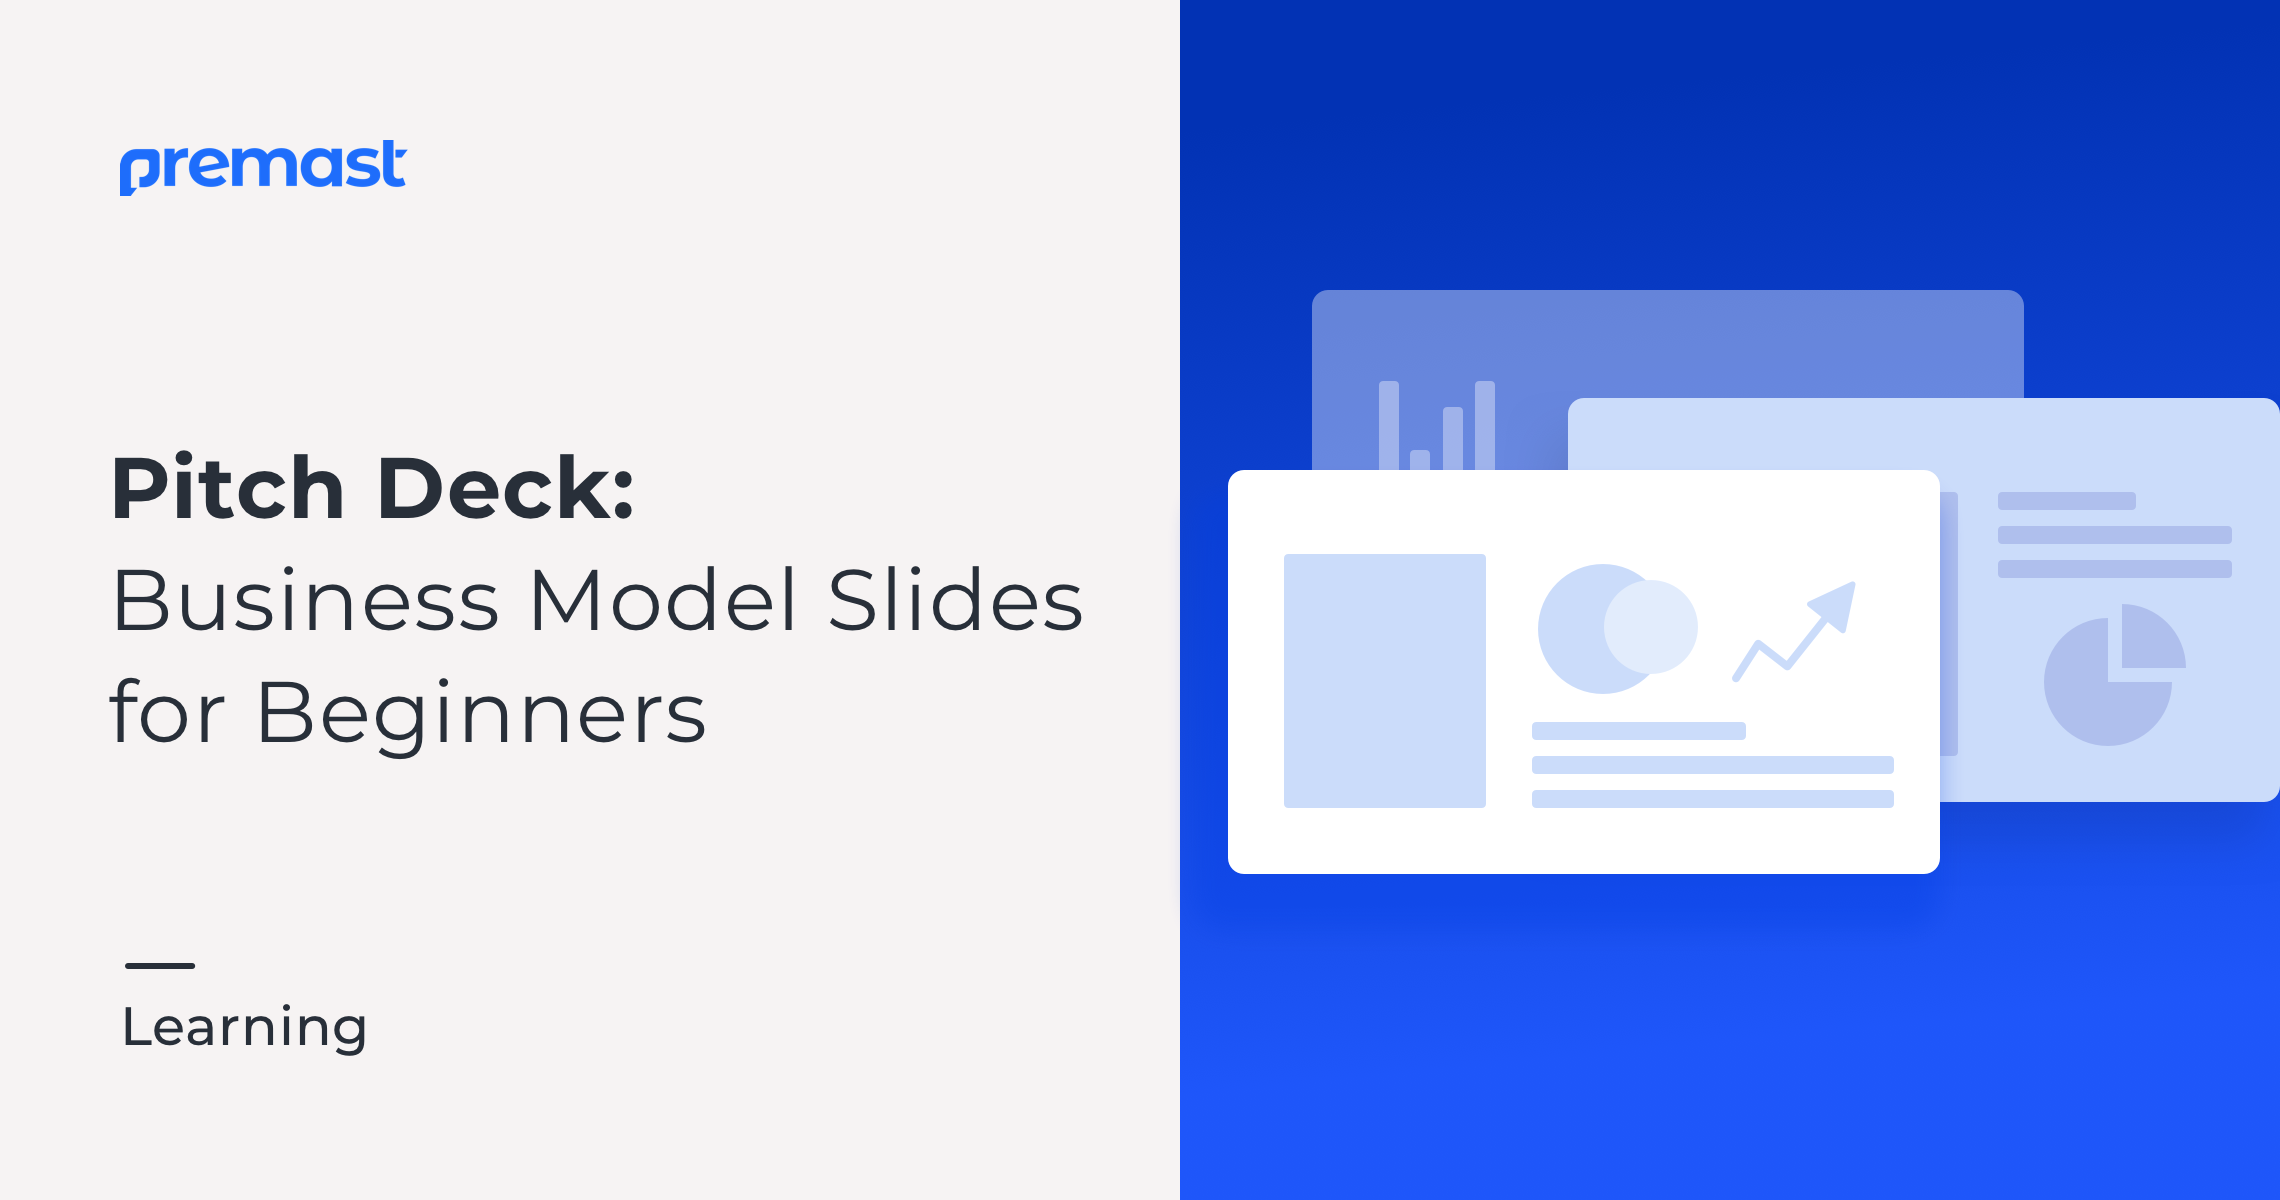 Pitch deck: Business Model Slides for Beginners